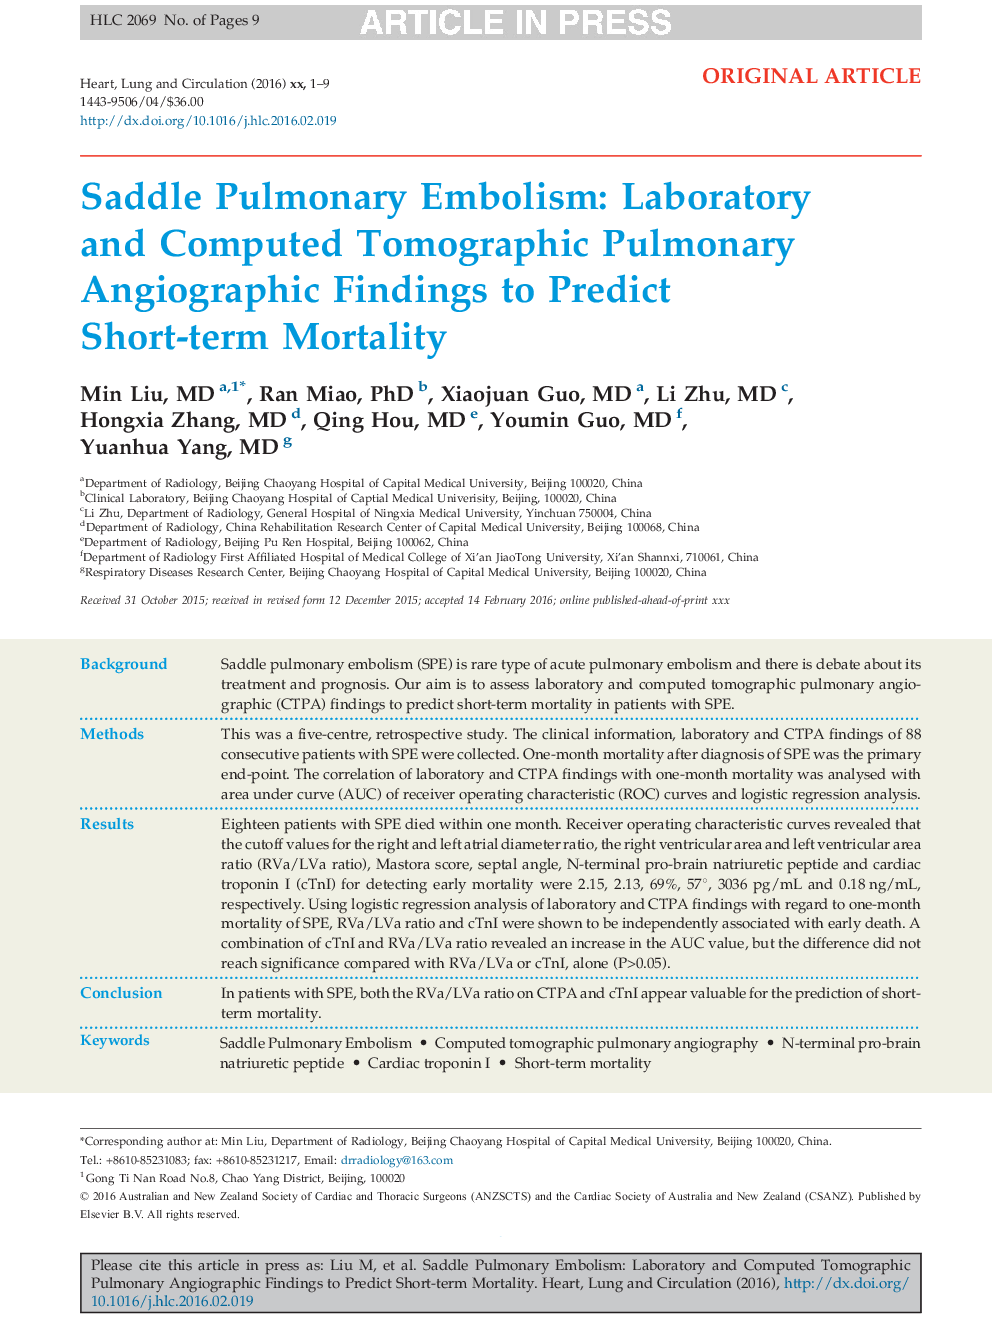 Saddle Pulmonary Embolism: Laboratory and Computed Tomographic Pulmonary Angiographic Findings to Predict Short-term Mortality